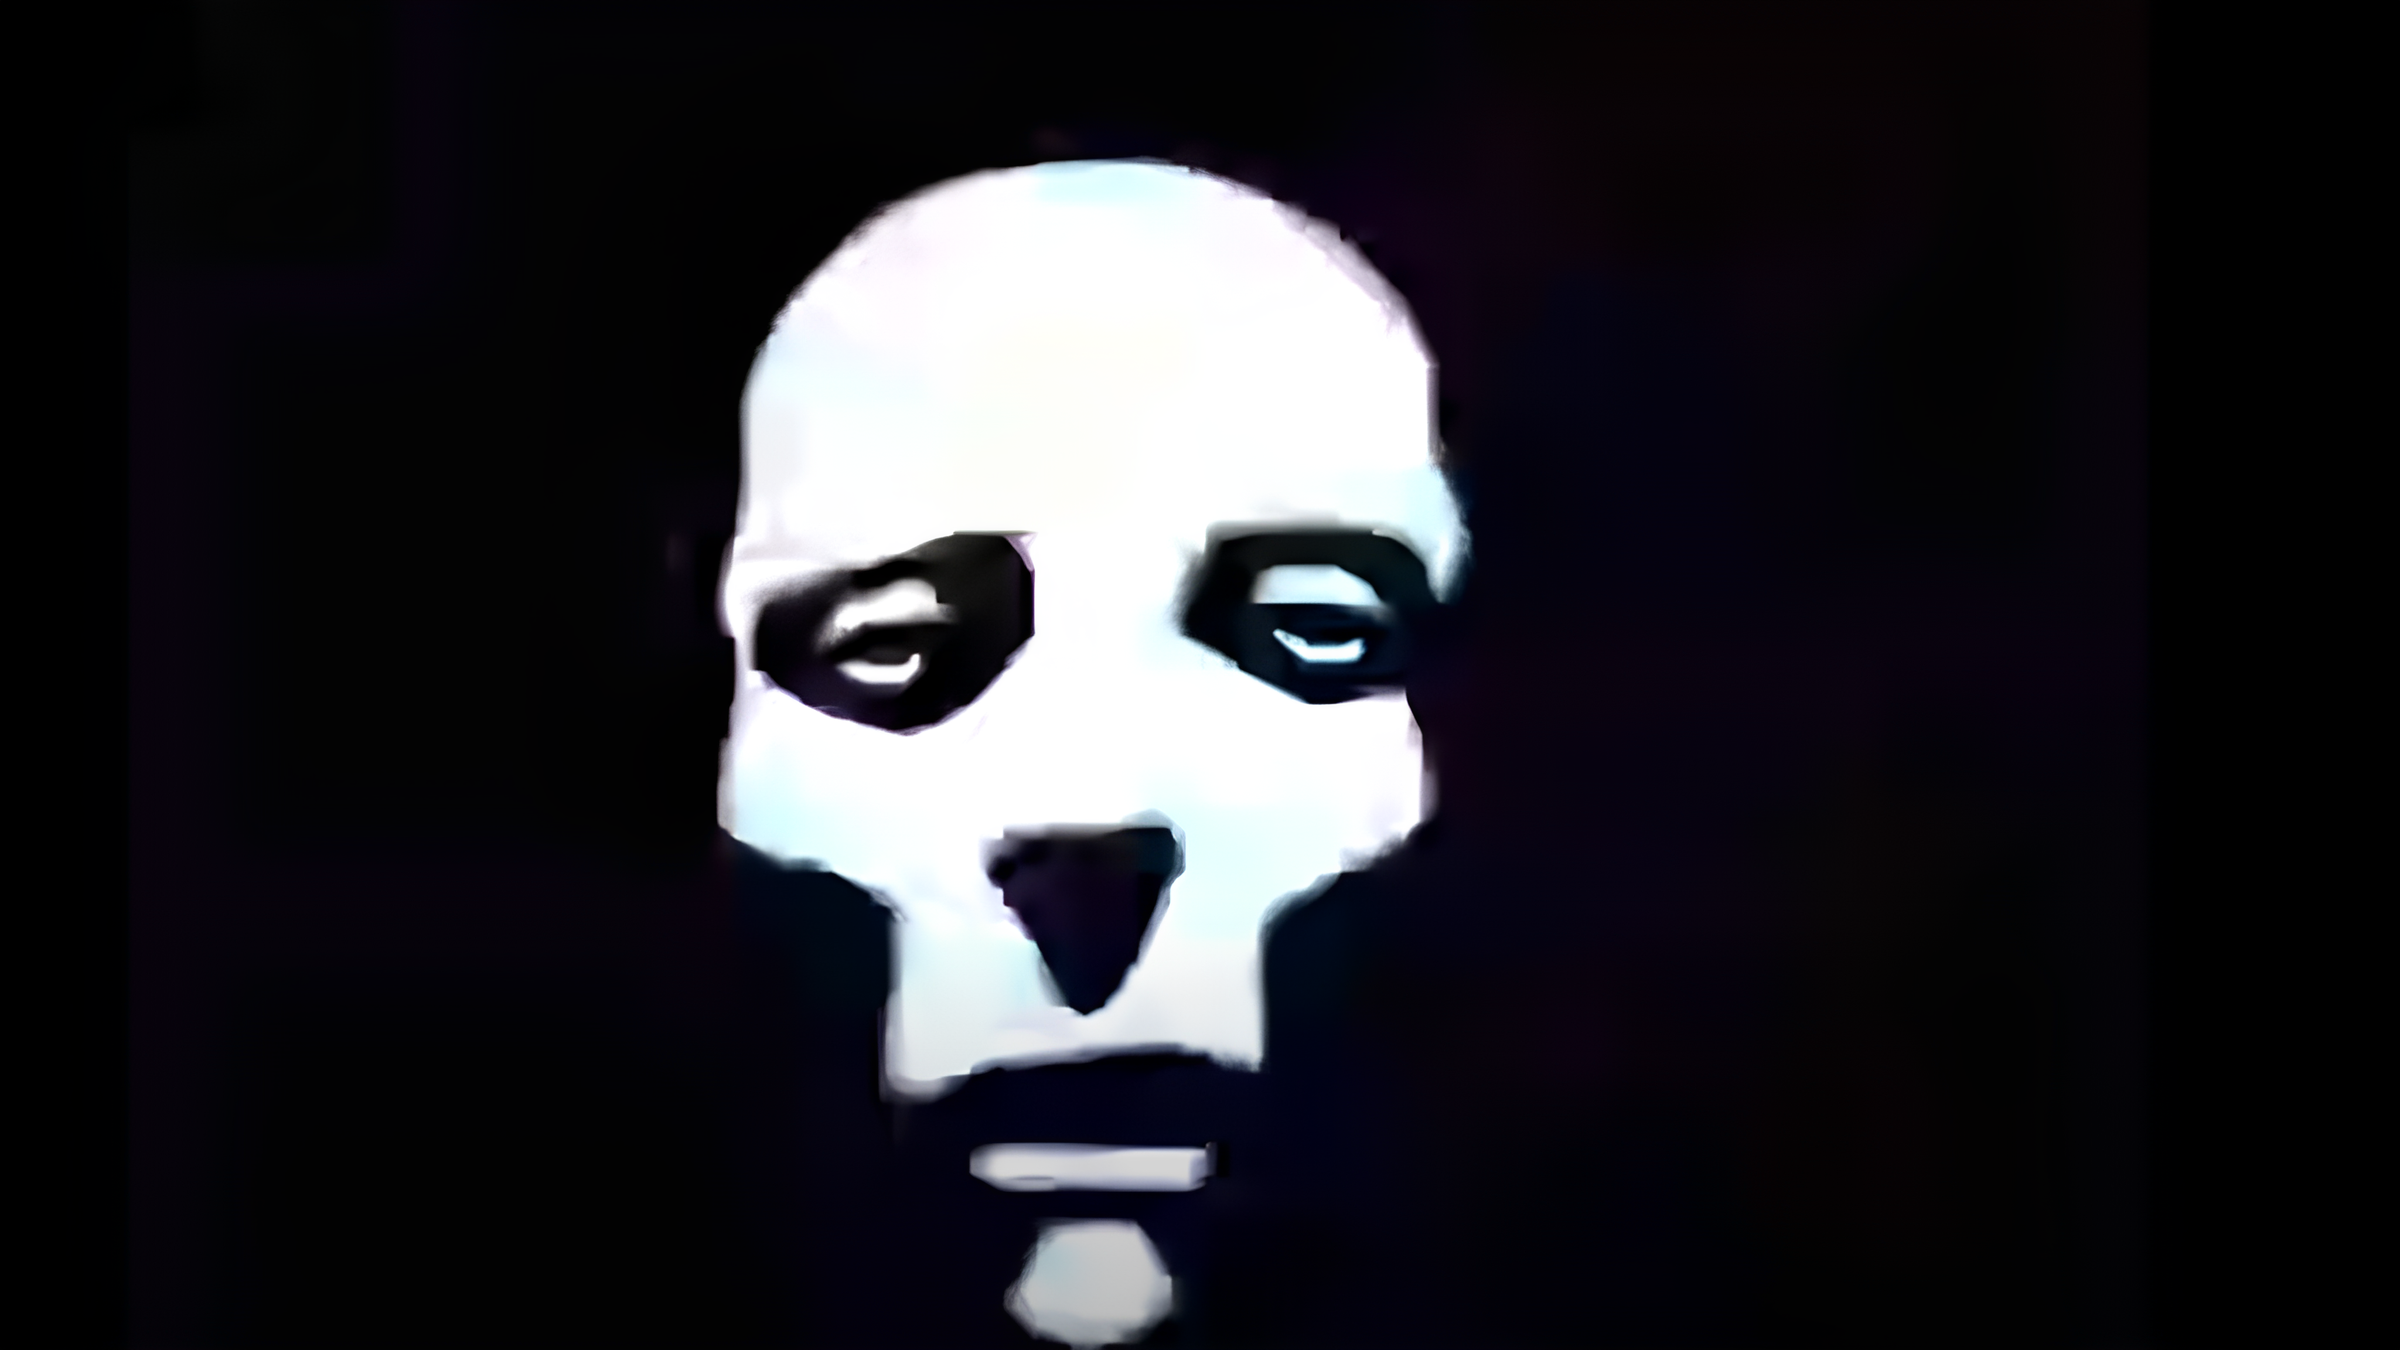 The A.I. Robert Vance - depicted as a mournful white face against a black void - in Batman Beyond